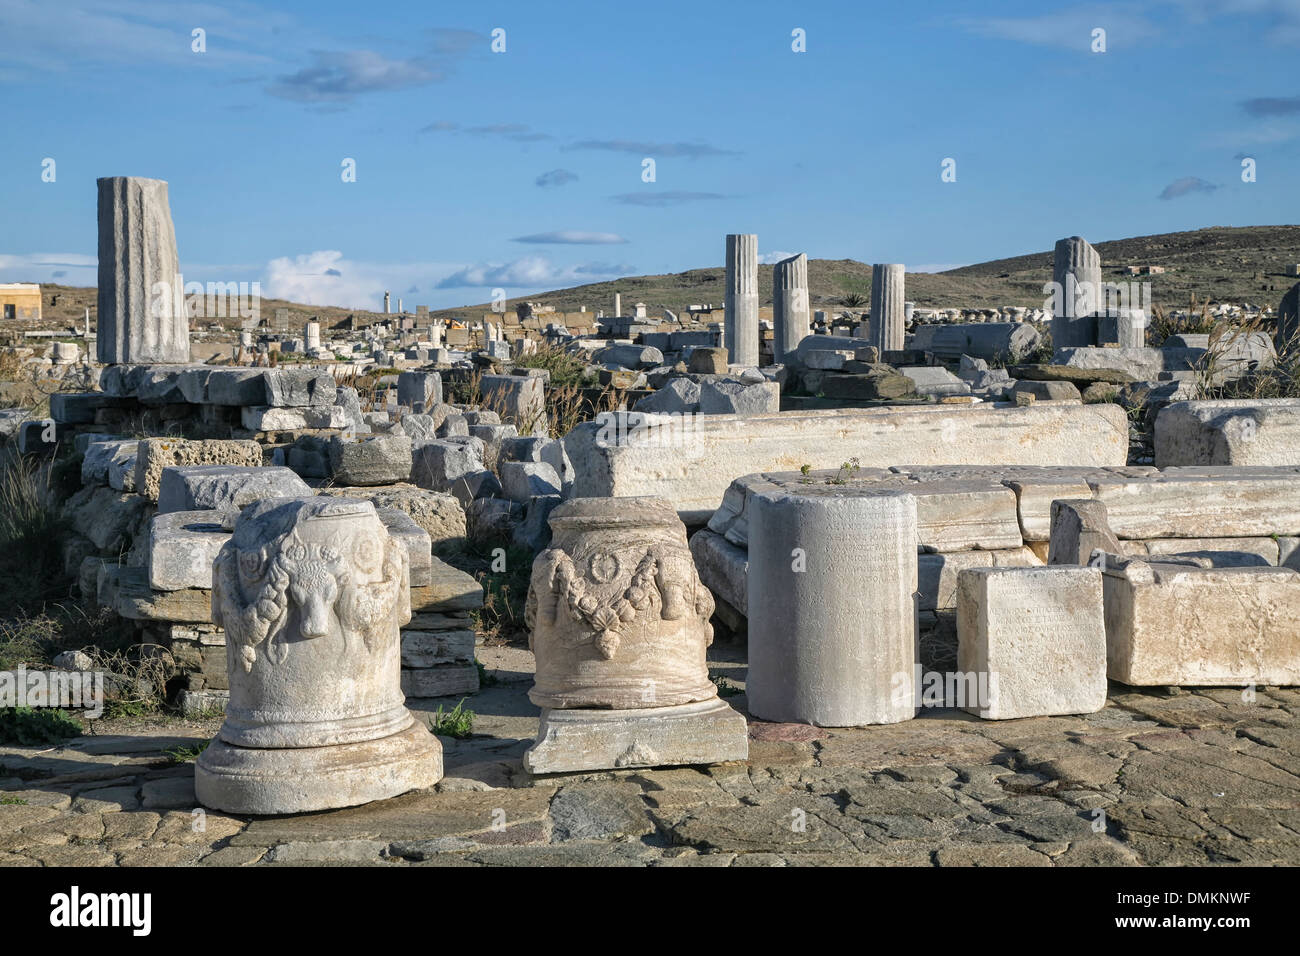 The expanse of ruins on the island of Delos, Greece. Stock Photo